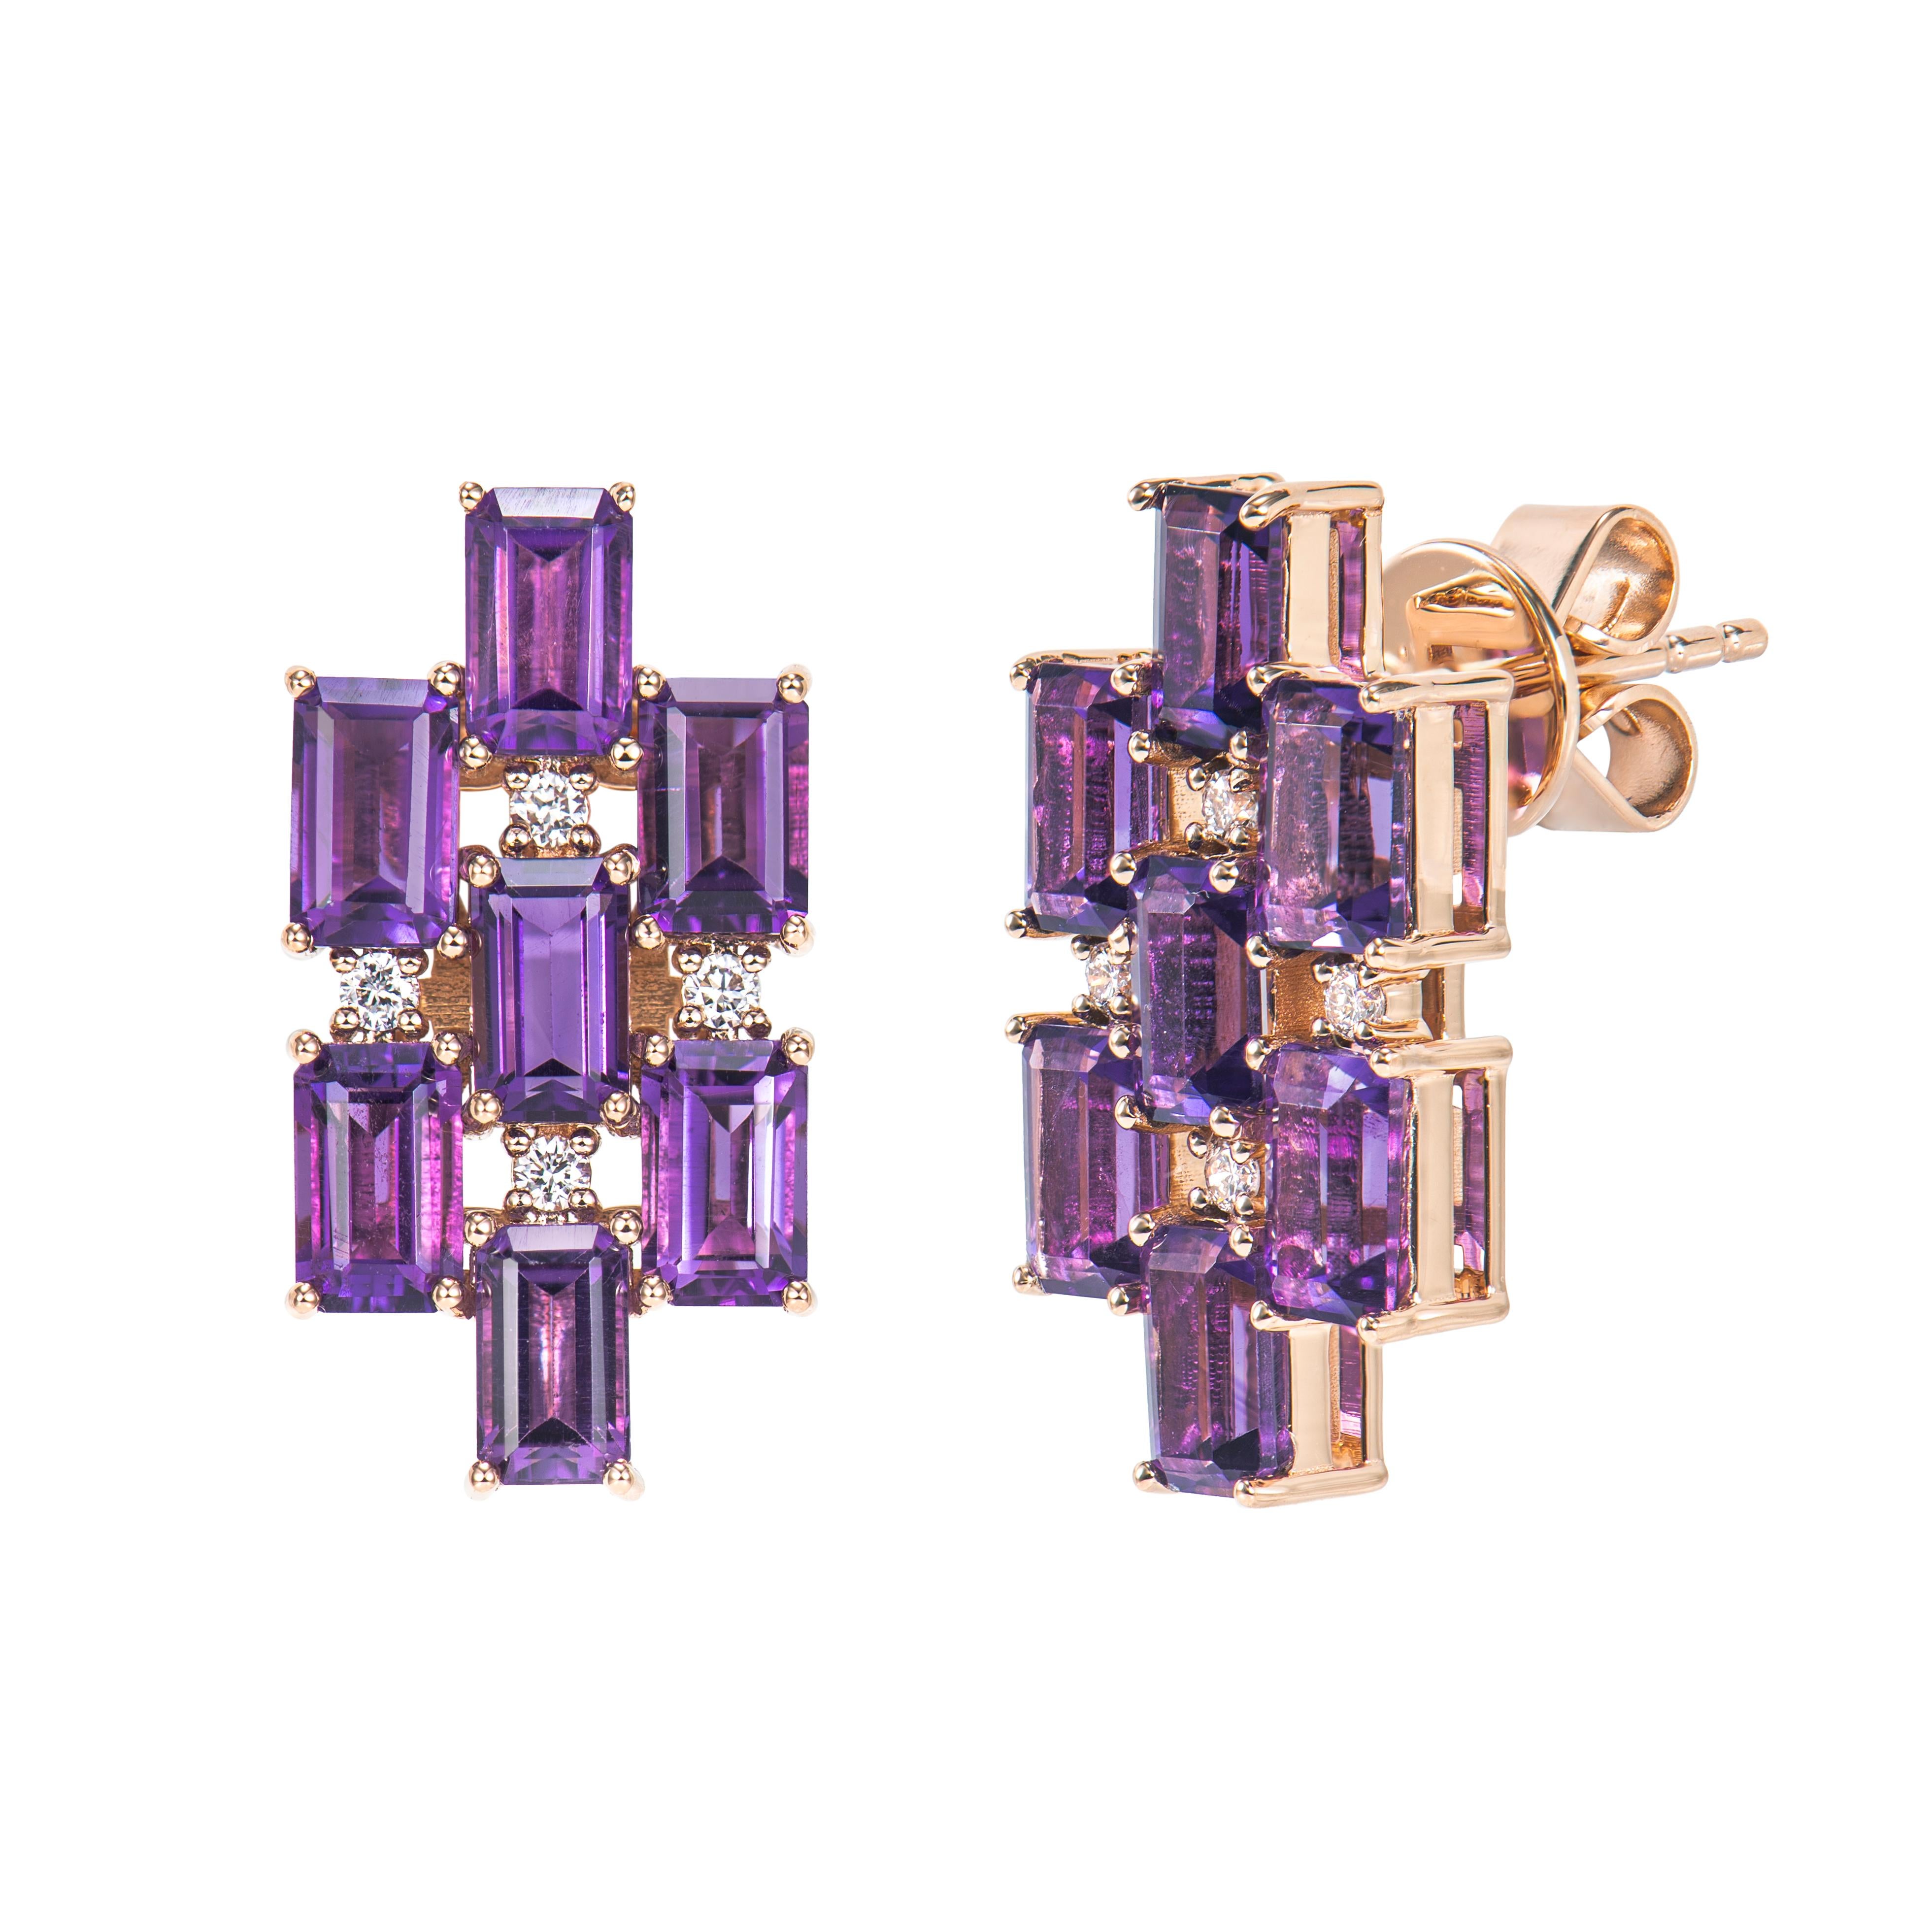 Octagon Cut 4.05 Carat Amethyst Drop Earring in 18Karat Rose Gold with White Diamond. For Sale